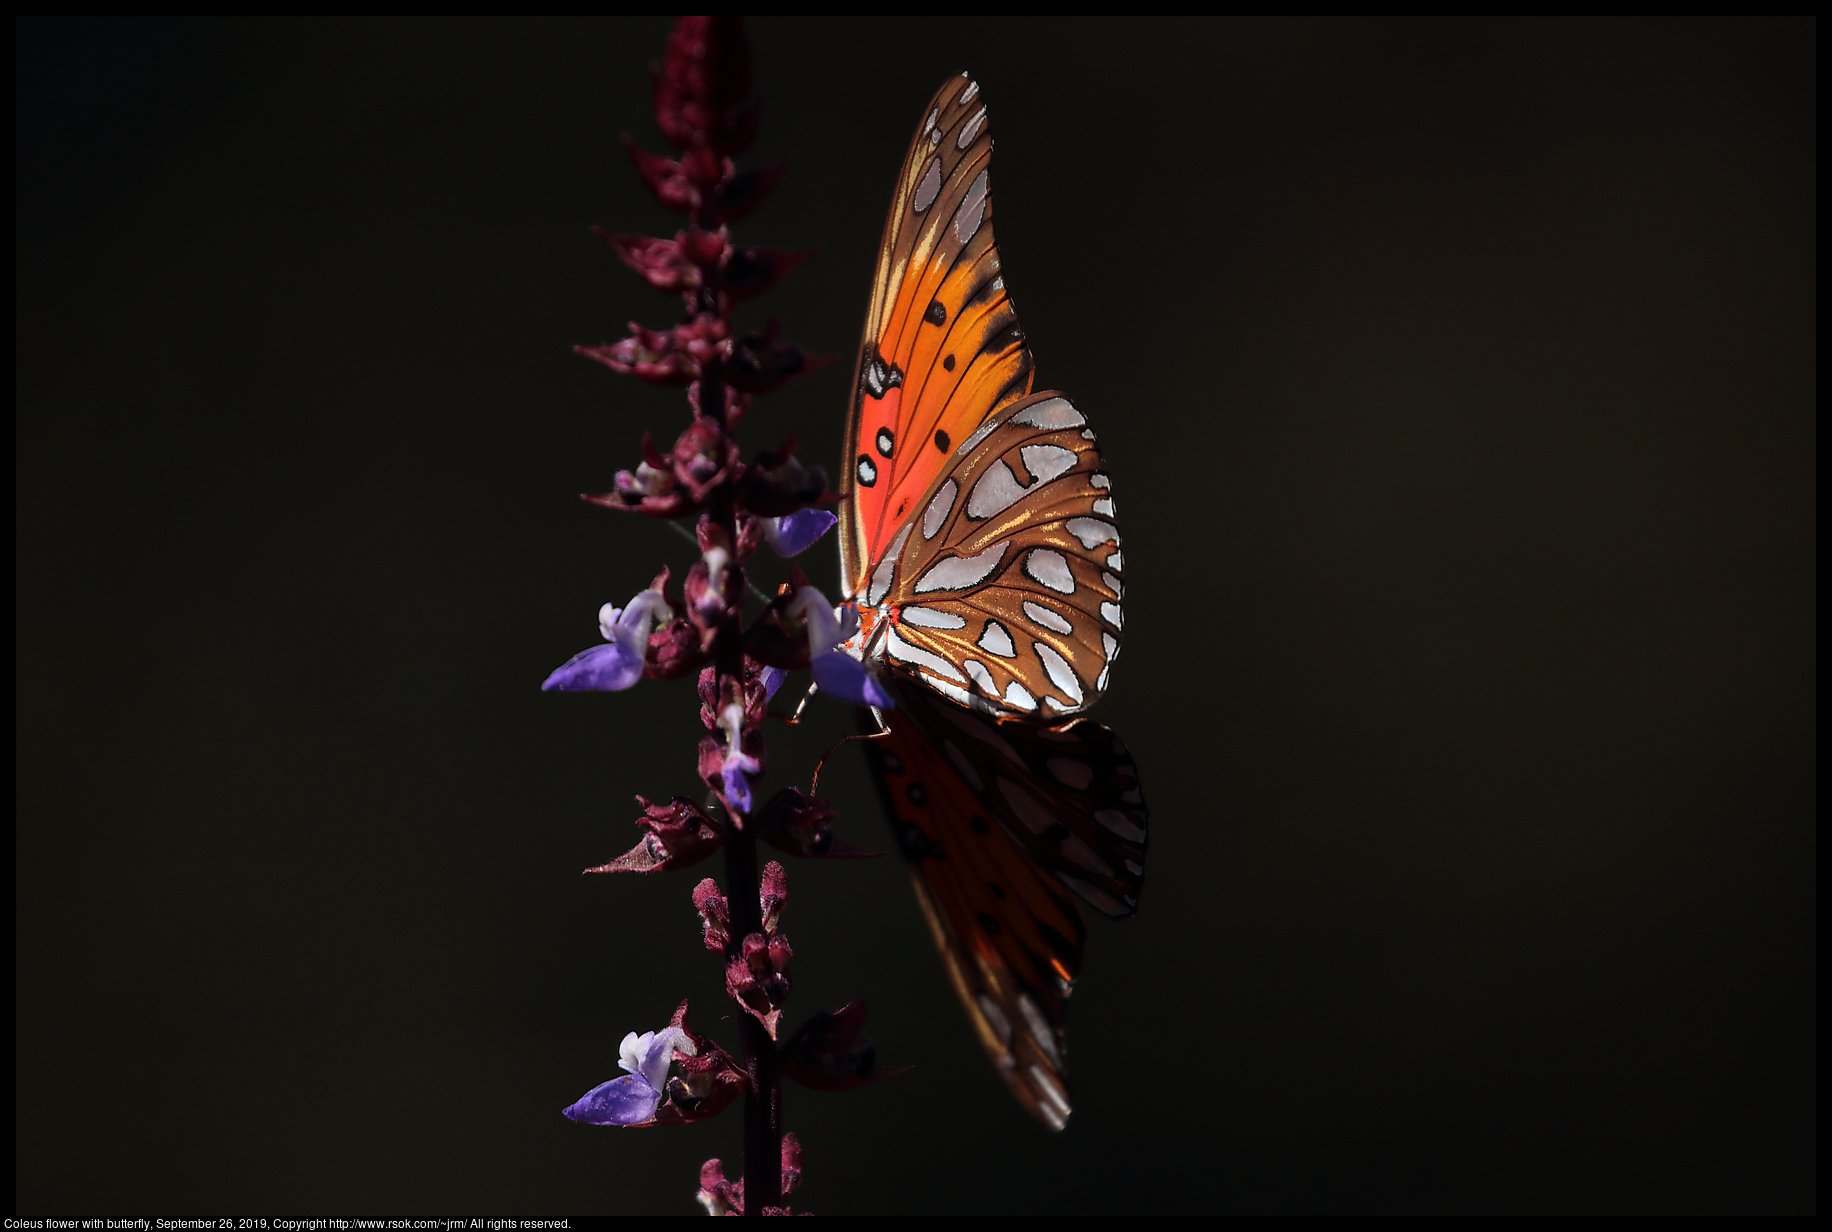 Coleus flower with butterfly, September 26, 2019